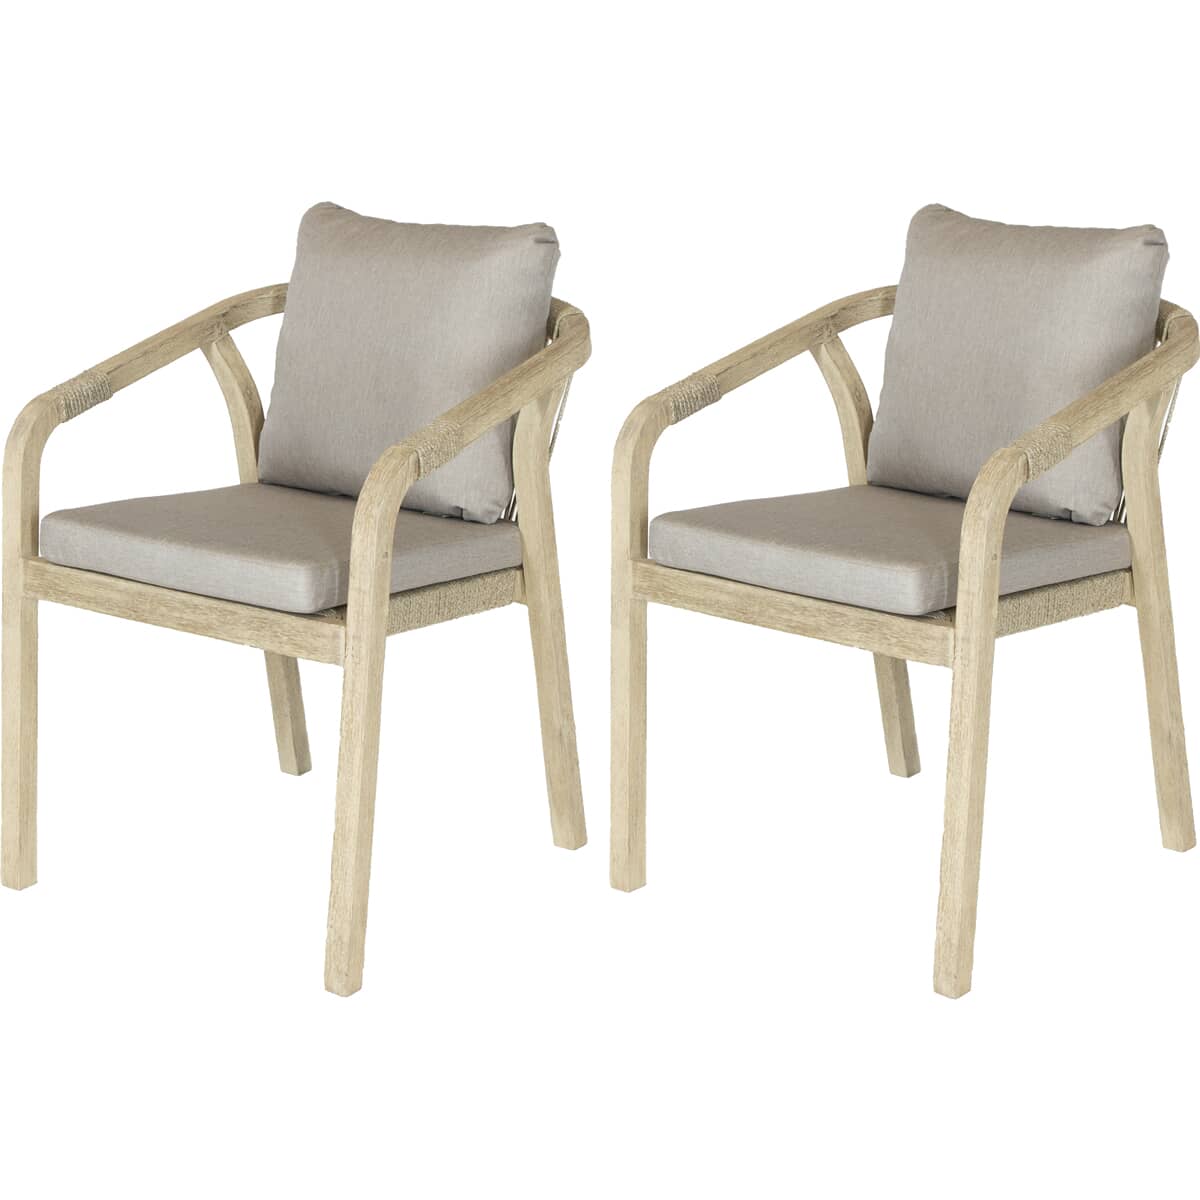 Kettler Cora Rope - Dining Chair with seat pad (Pair)